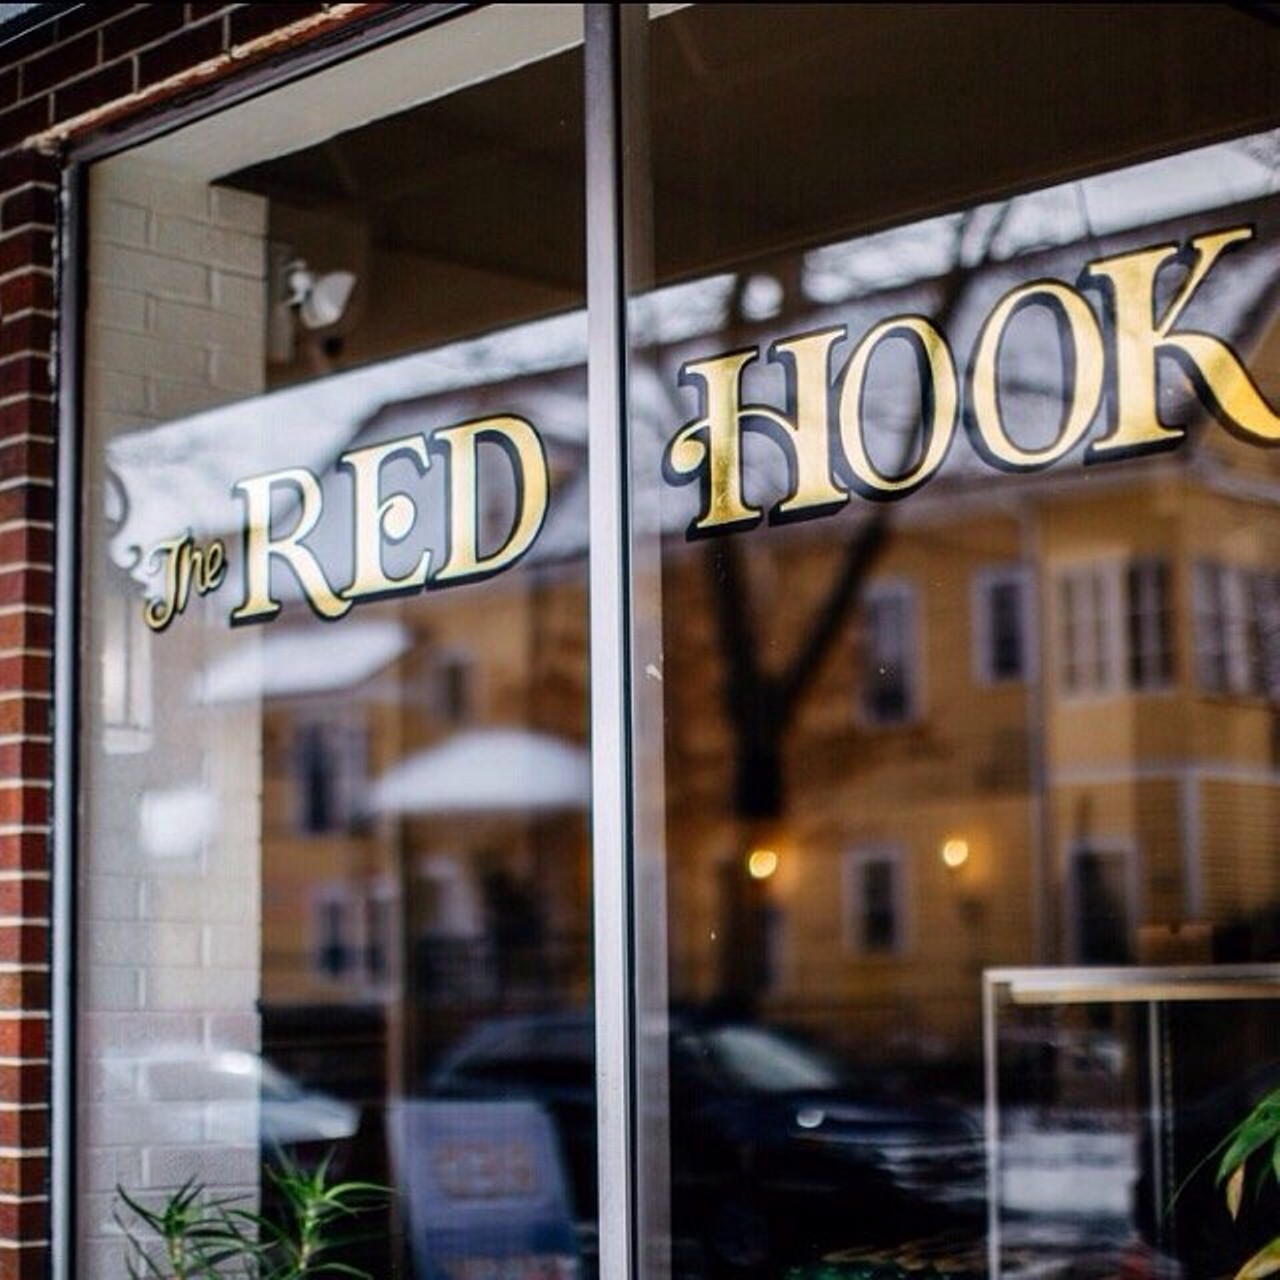 The Red Hook - 220 W. Nine Mile, Ferndale & 8025 Agnes, Detroit -
Best known for their selection of delectable baked goods, The Red Hook serves up rich hot chocolate at their original Ferndale location and in Detroit&#146;s West Village. (Photo via Yelp, Sandy H.)